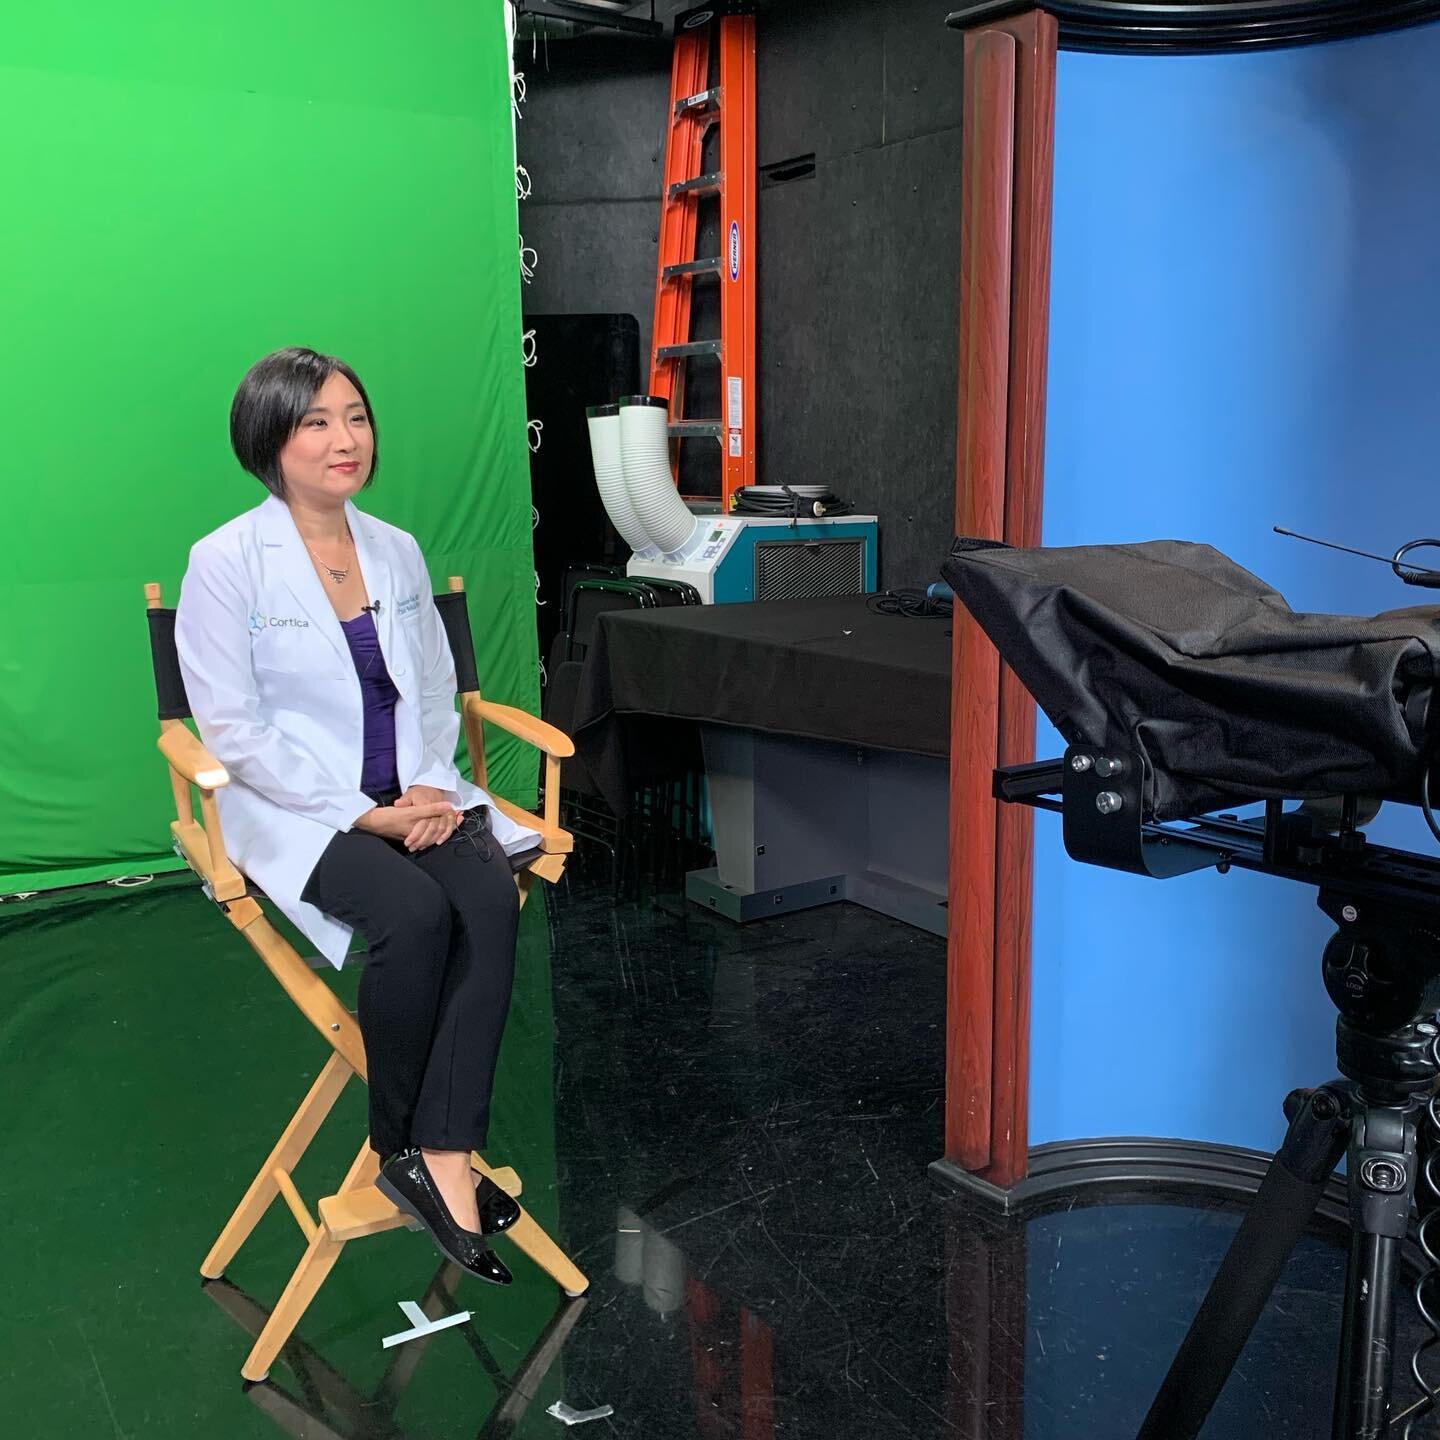 In the PBS Southern California studio shooting something exciting! I&rsquo;ve always been a fan of PBS&rsquo;s high-quality educational programming for children, and the exclusive partnership between Cortica and PBS is nothing short of a dream come t